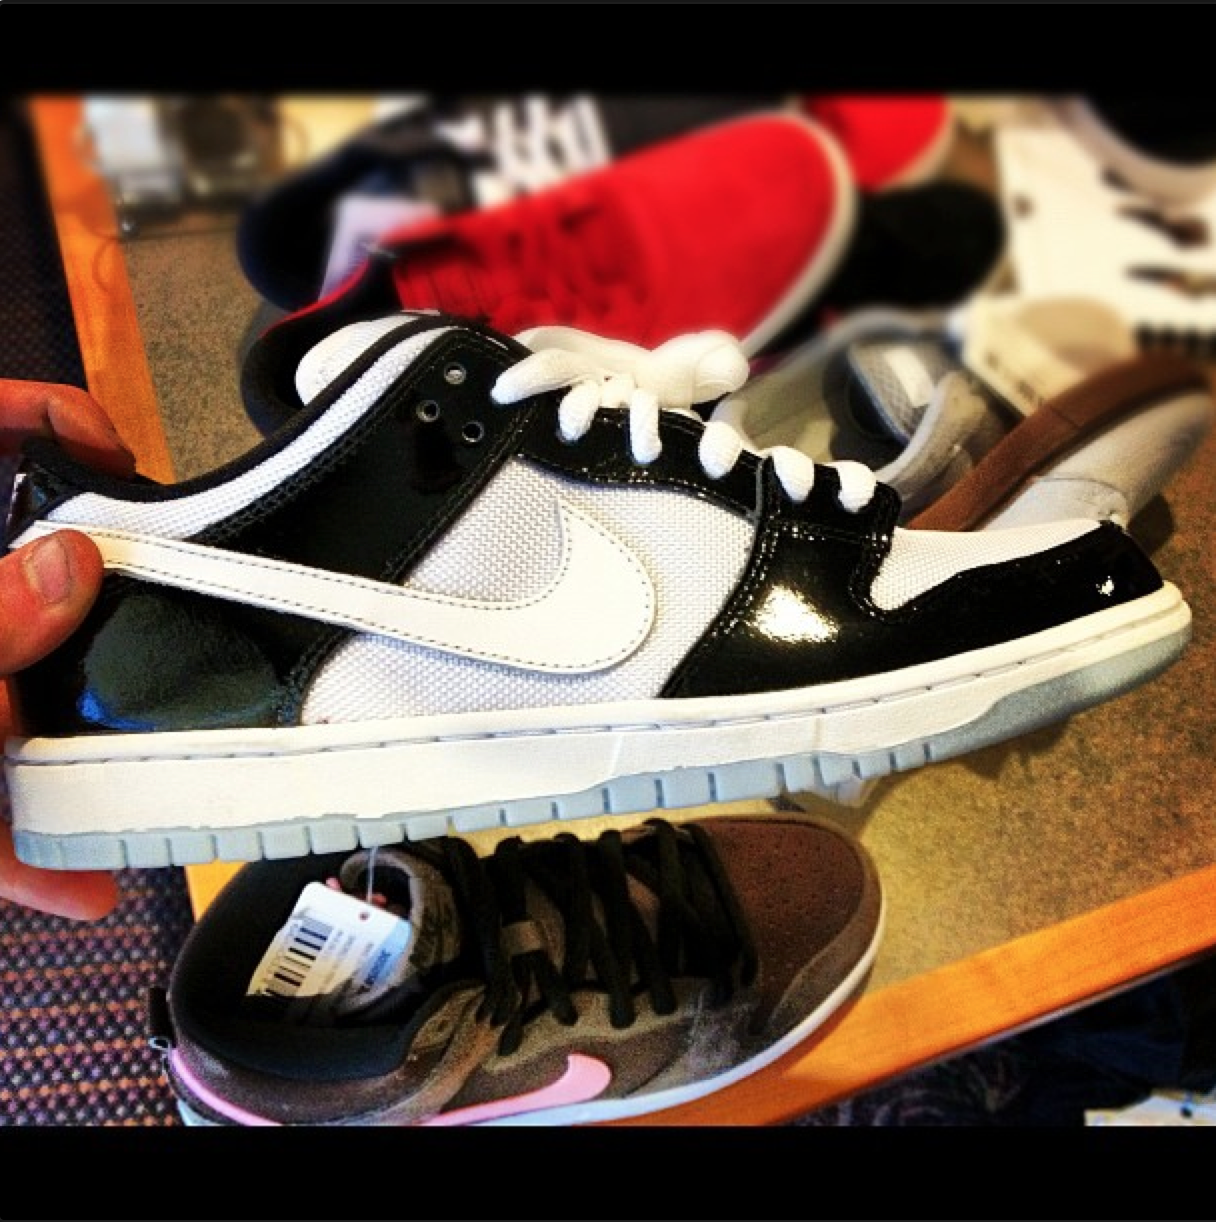 Brooklyn Projects x Nike SB Dunk Low ‘Concord’ - New Images